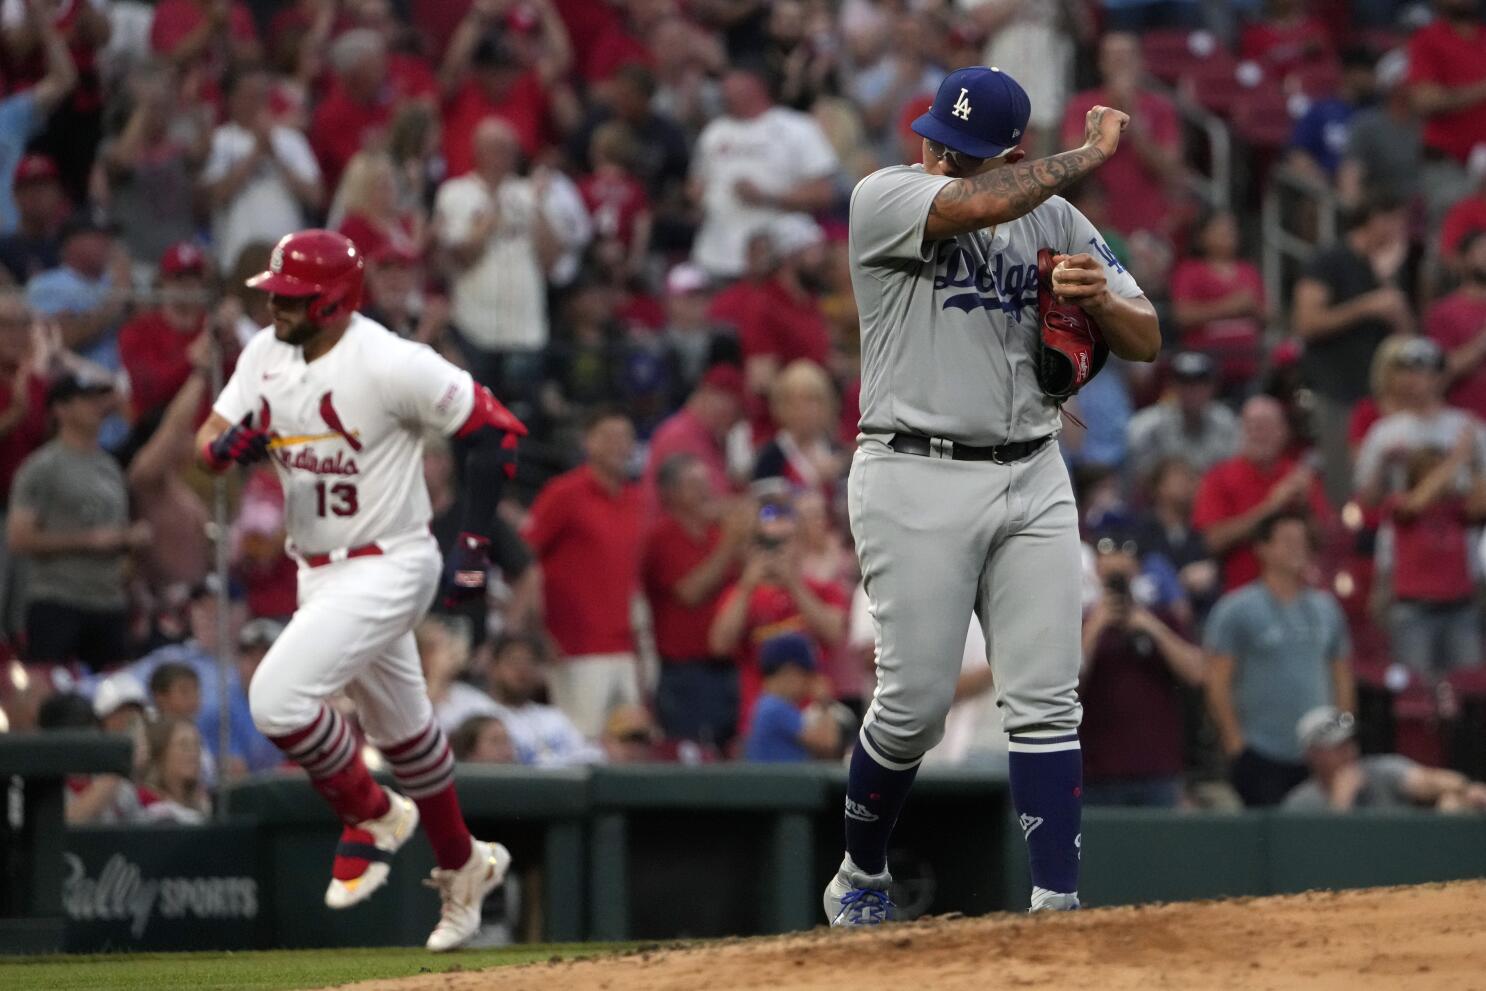 Media Views: Cardinals vs. Dodgers game Friday will be shown only